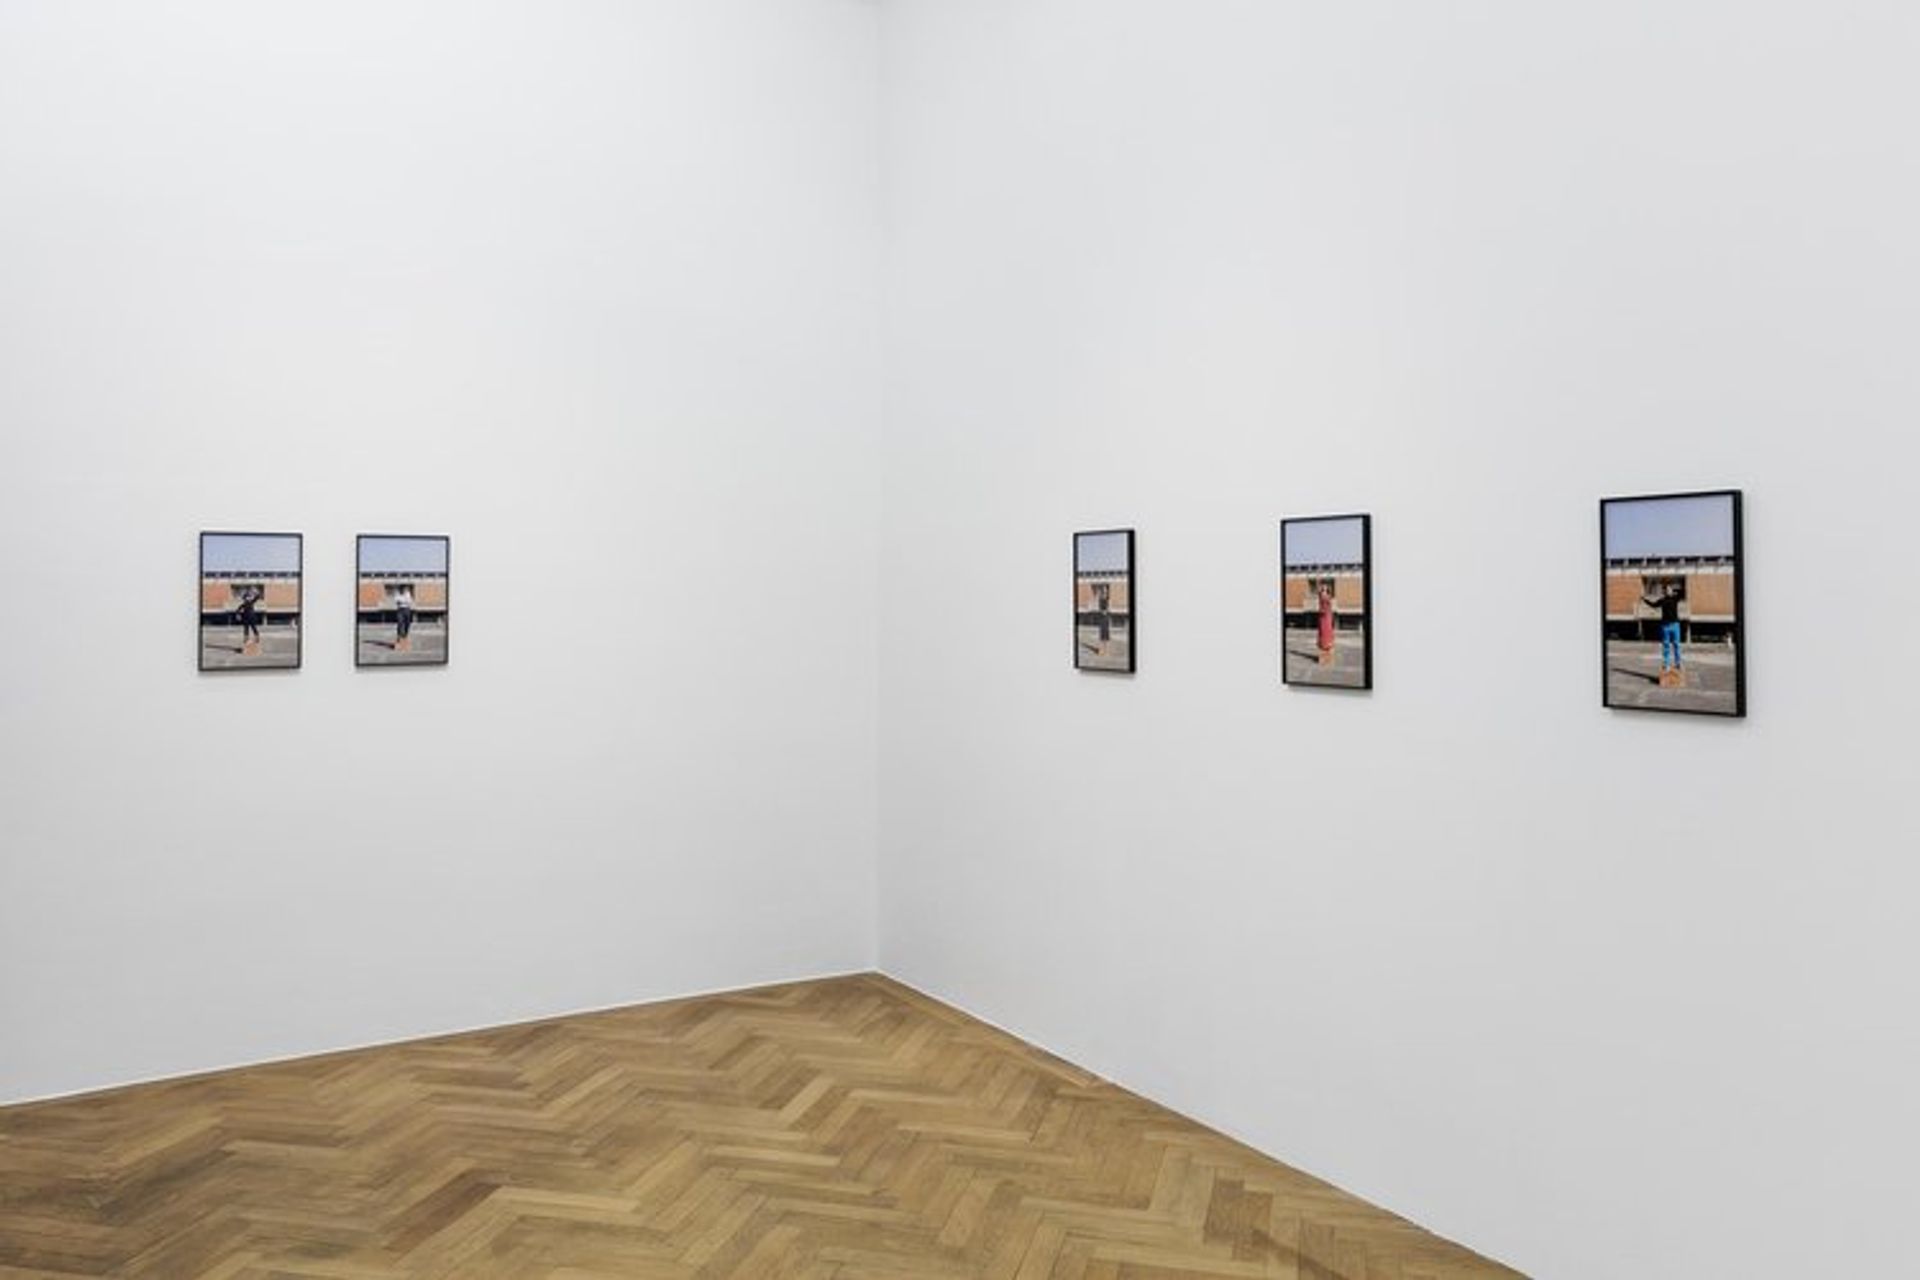 Installation view: Thomas Geiger: “The Great Relief March 29 - May 11”, 2019

Photo: Sebastian Kissel 